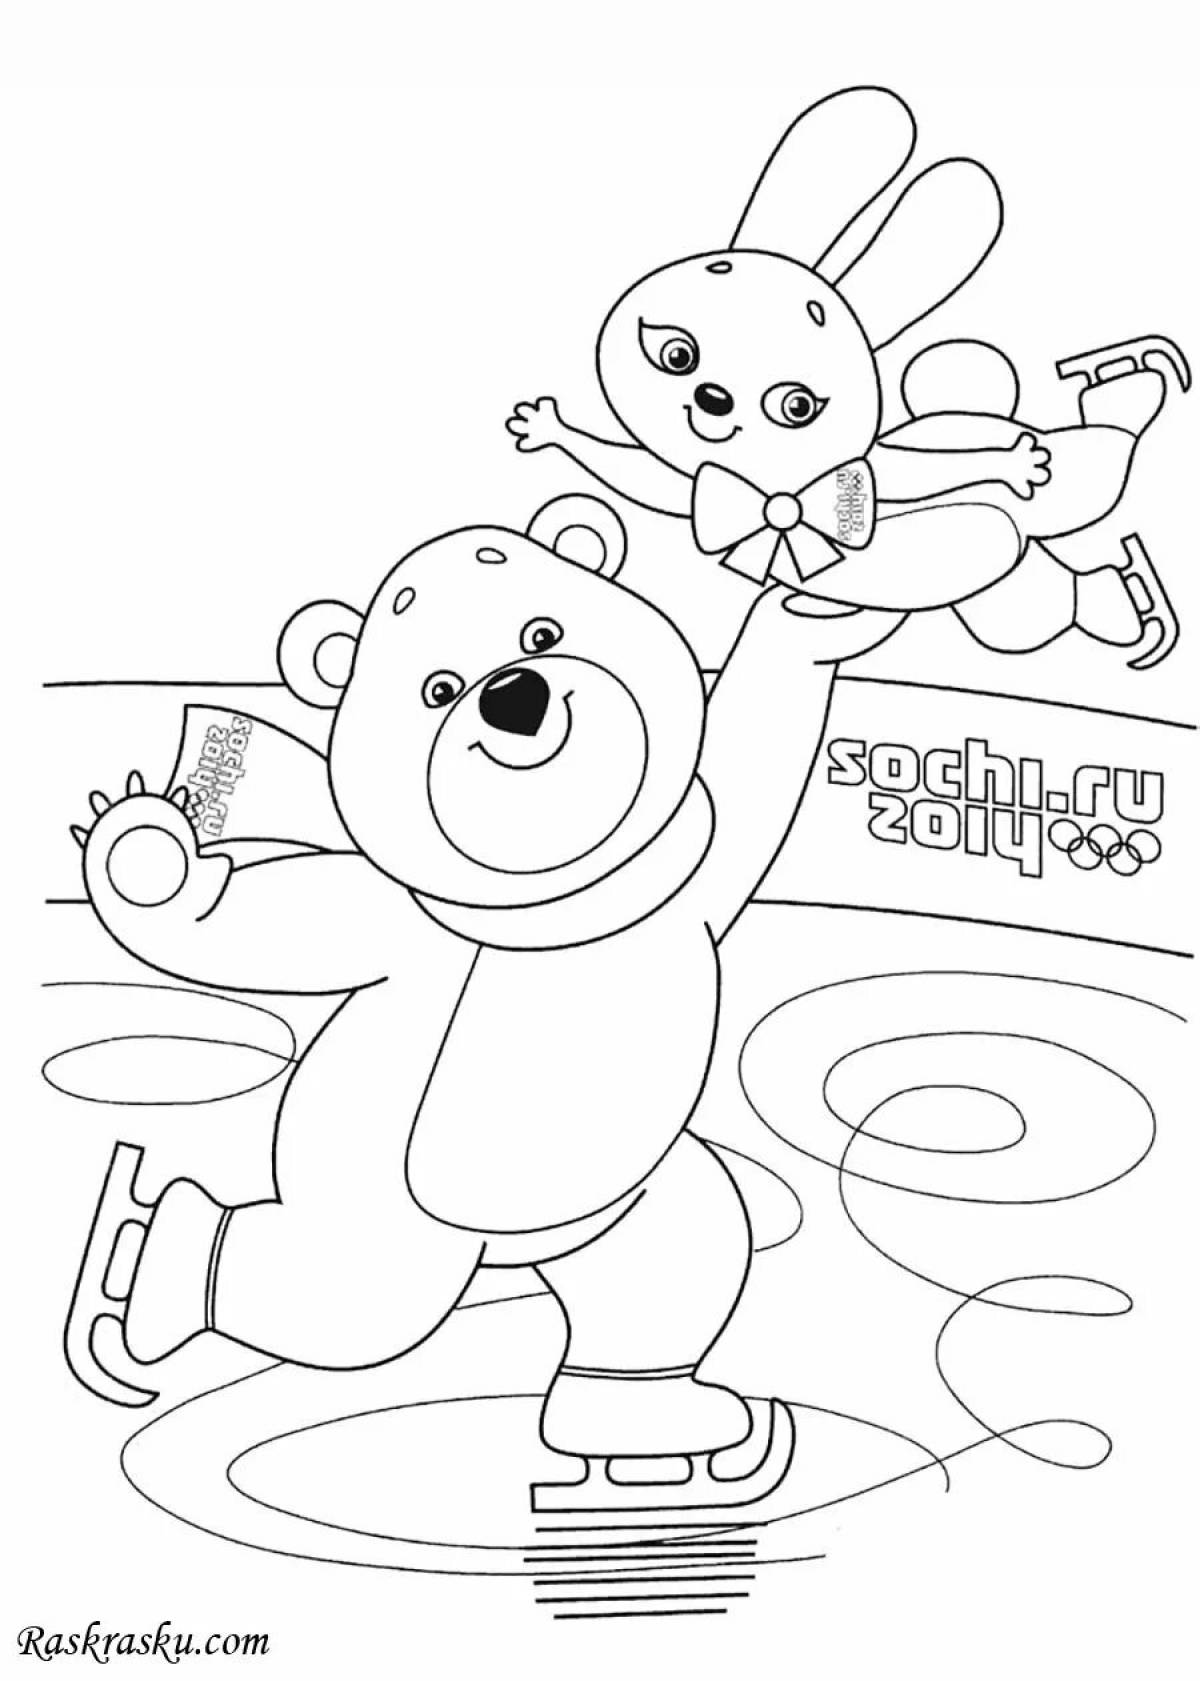 Colorful bear coloring game